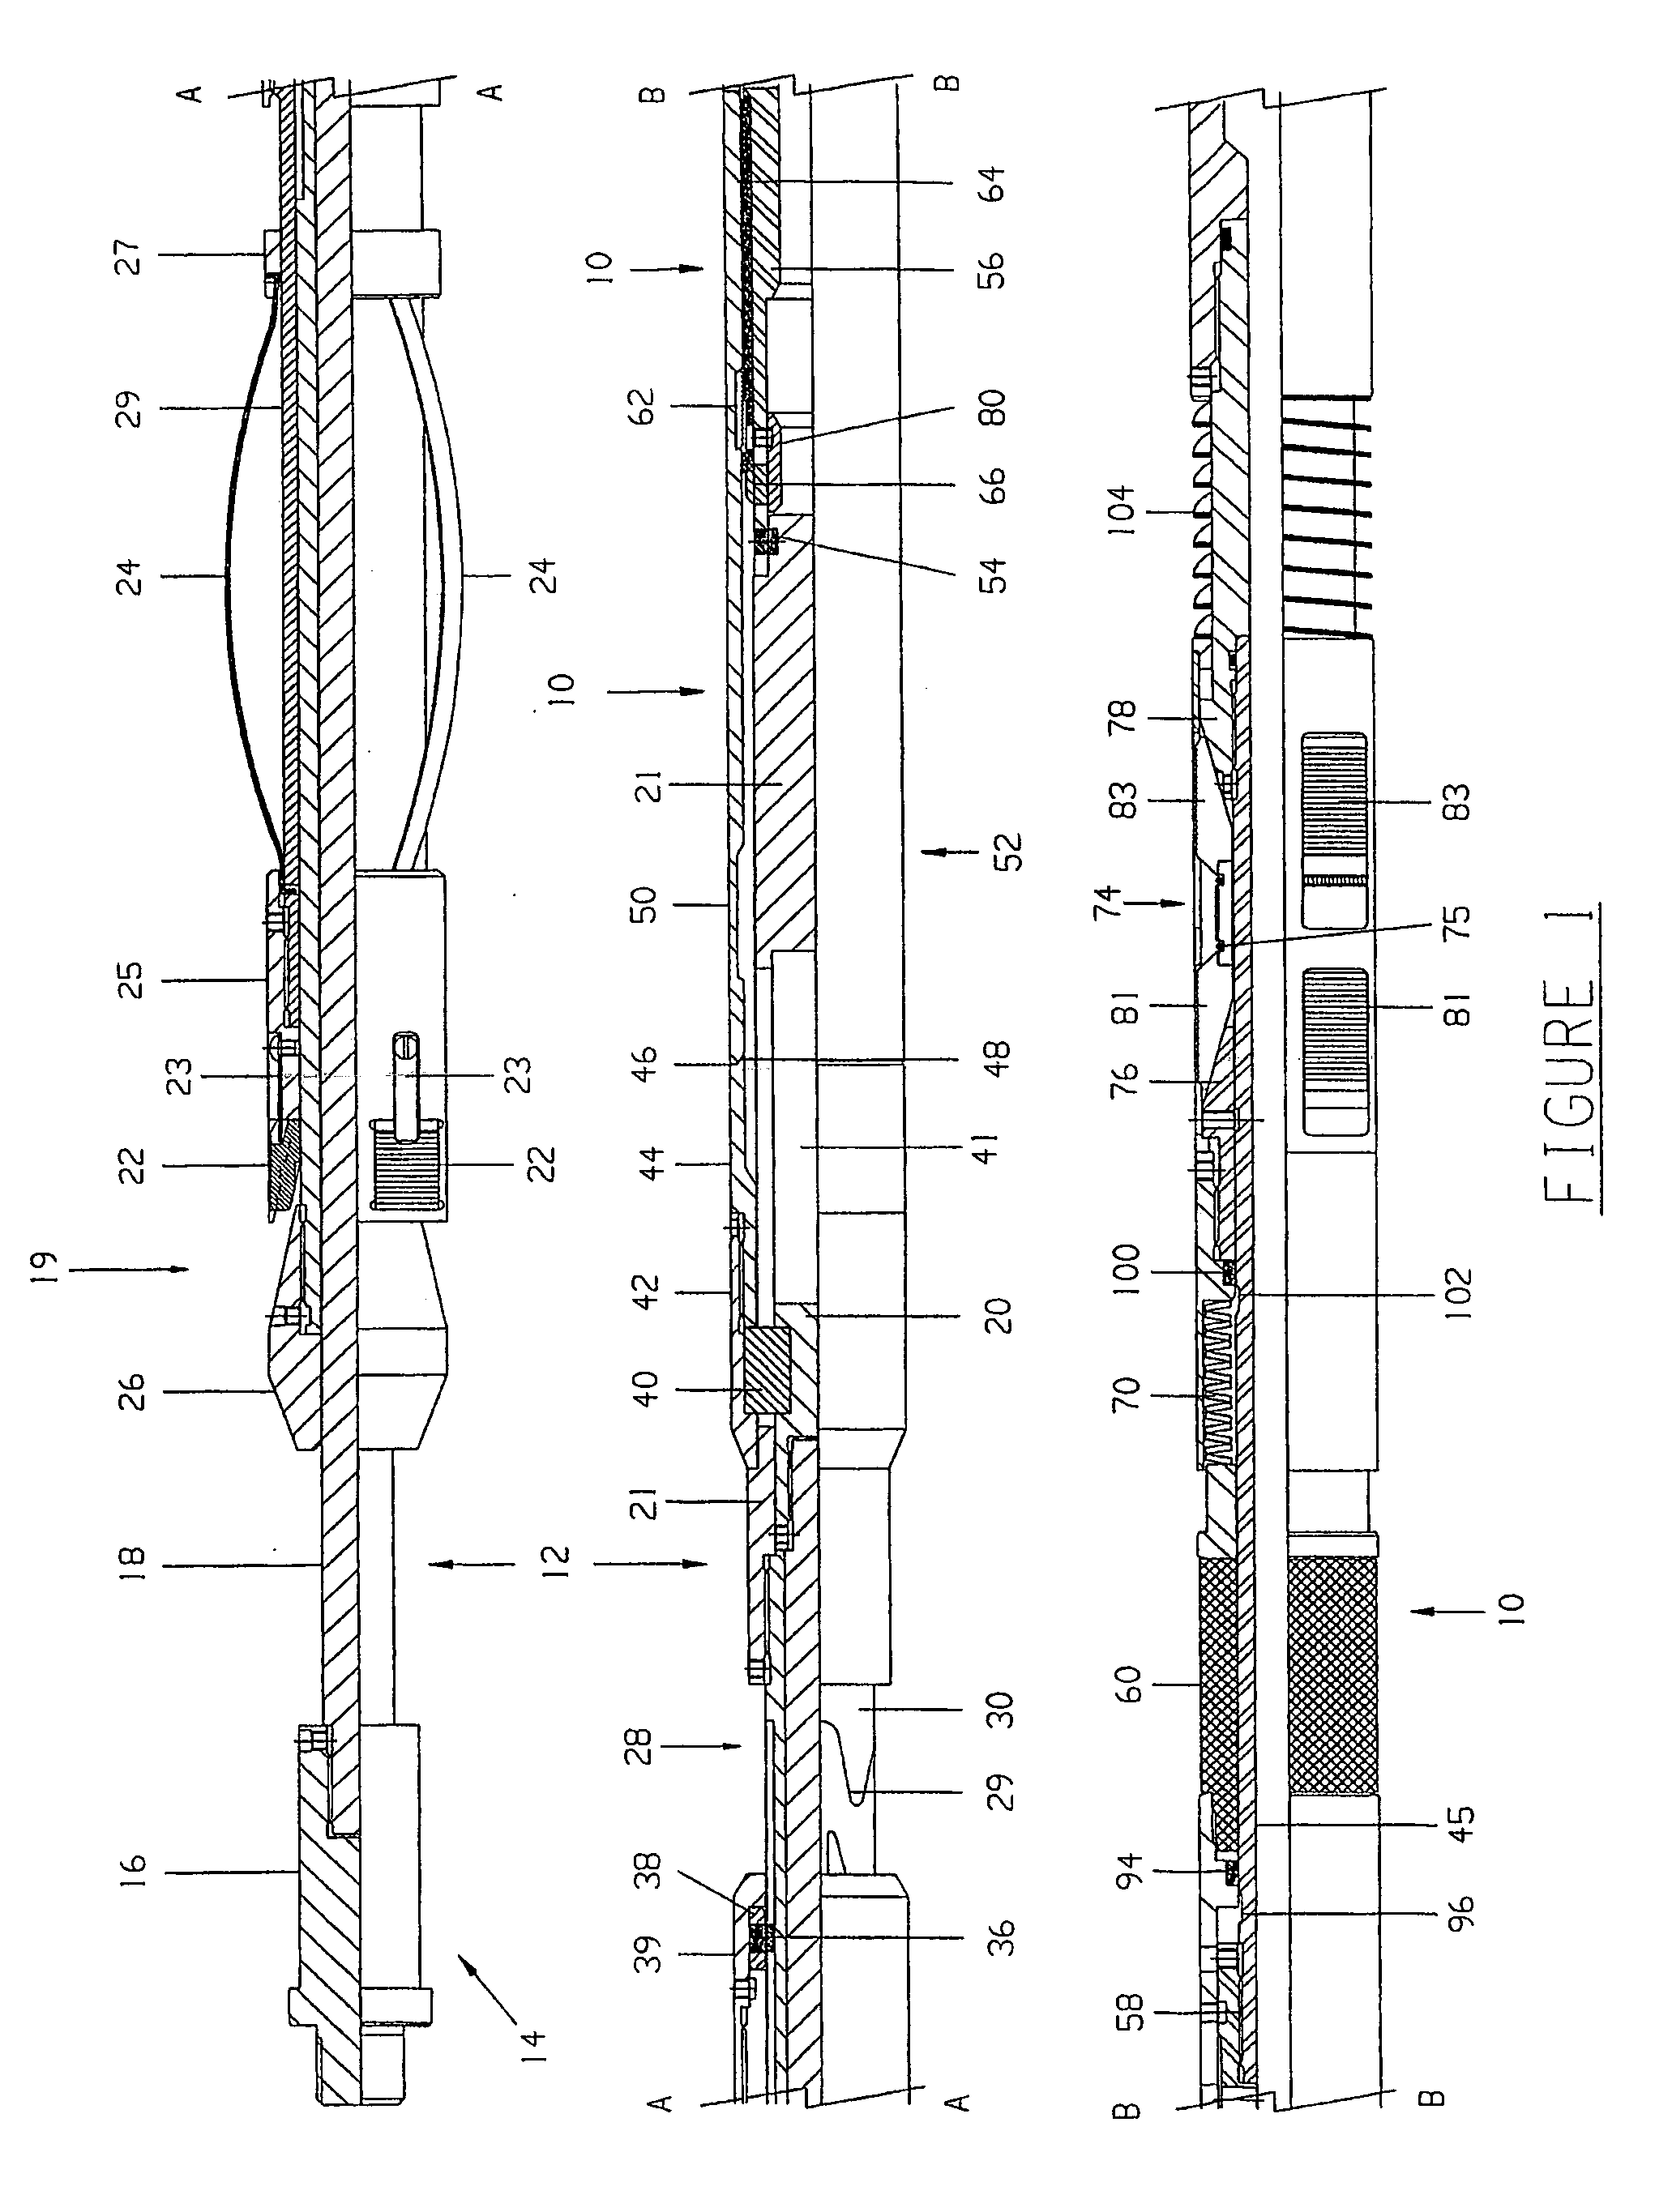 Retrievable downhole tool and running tool